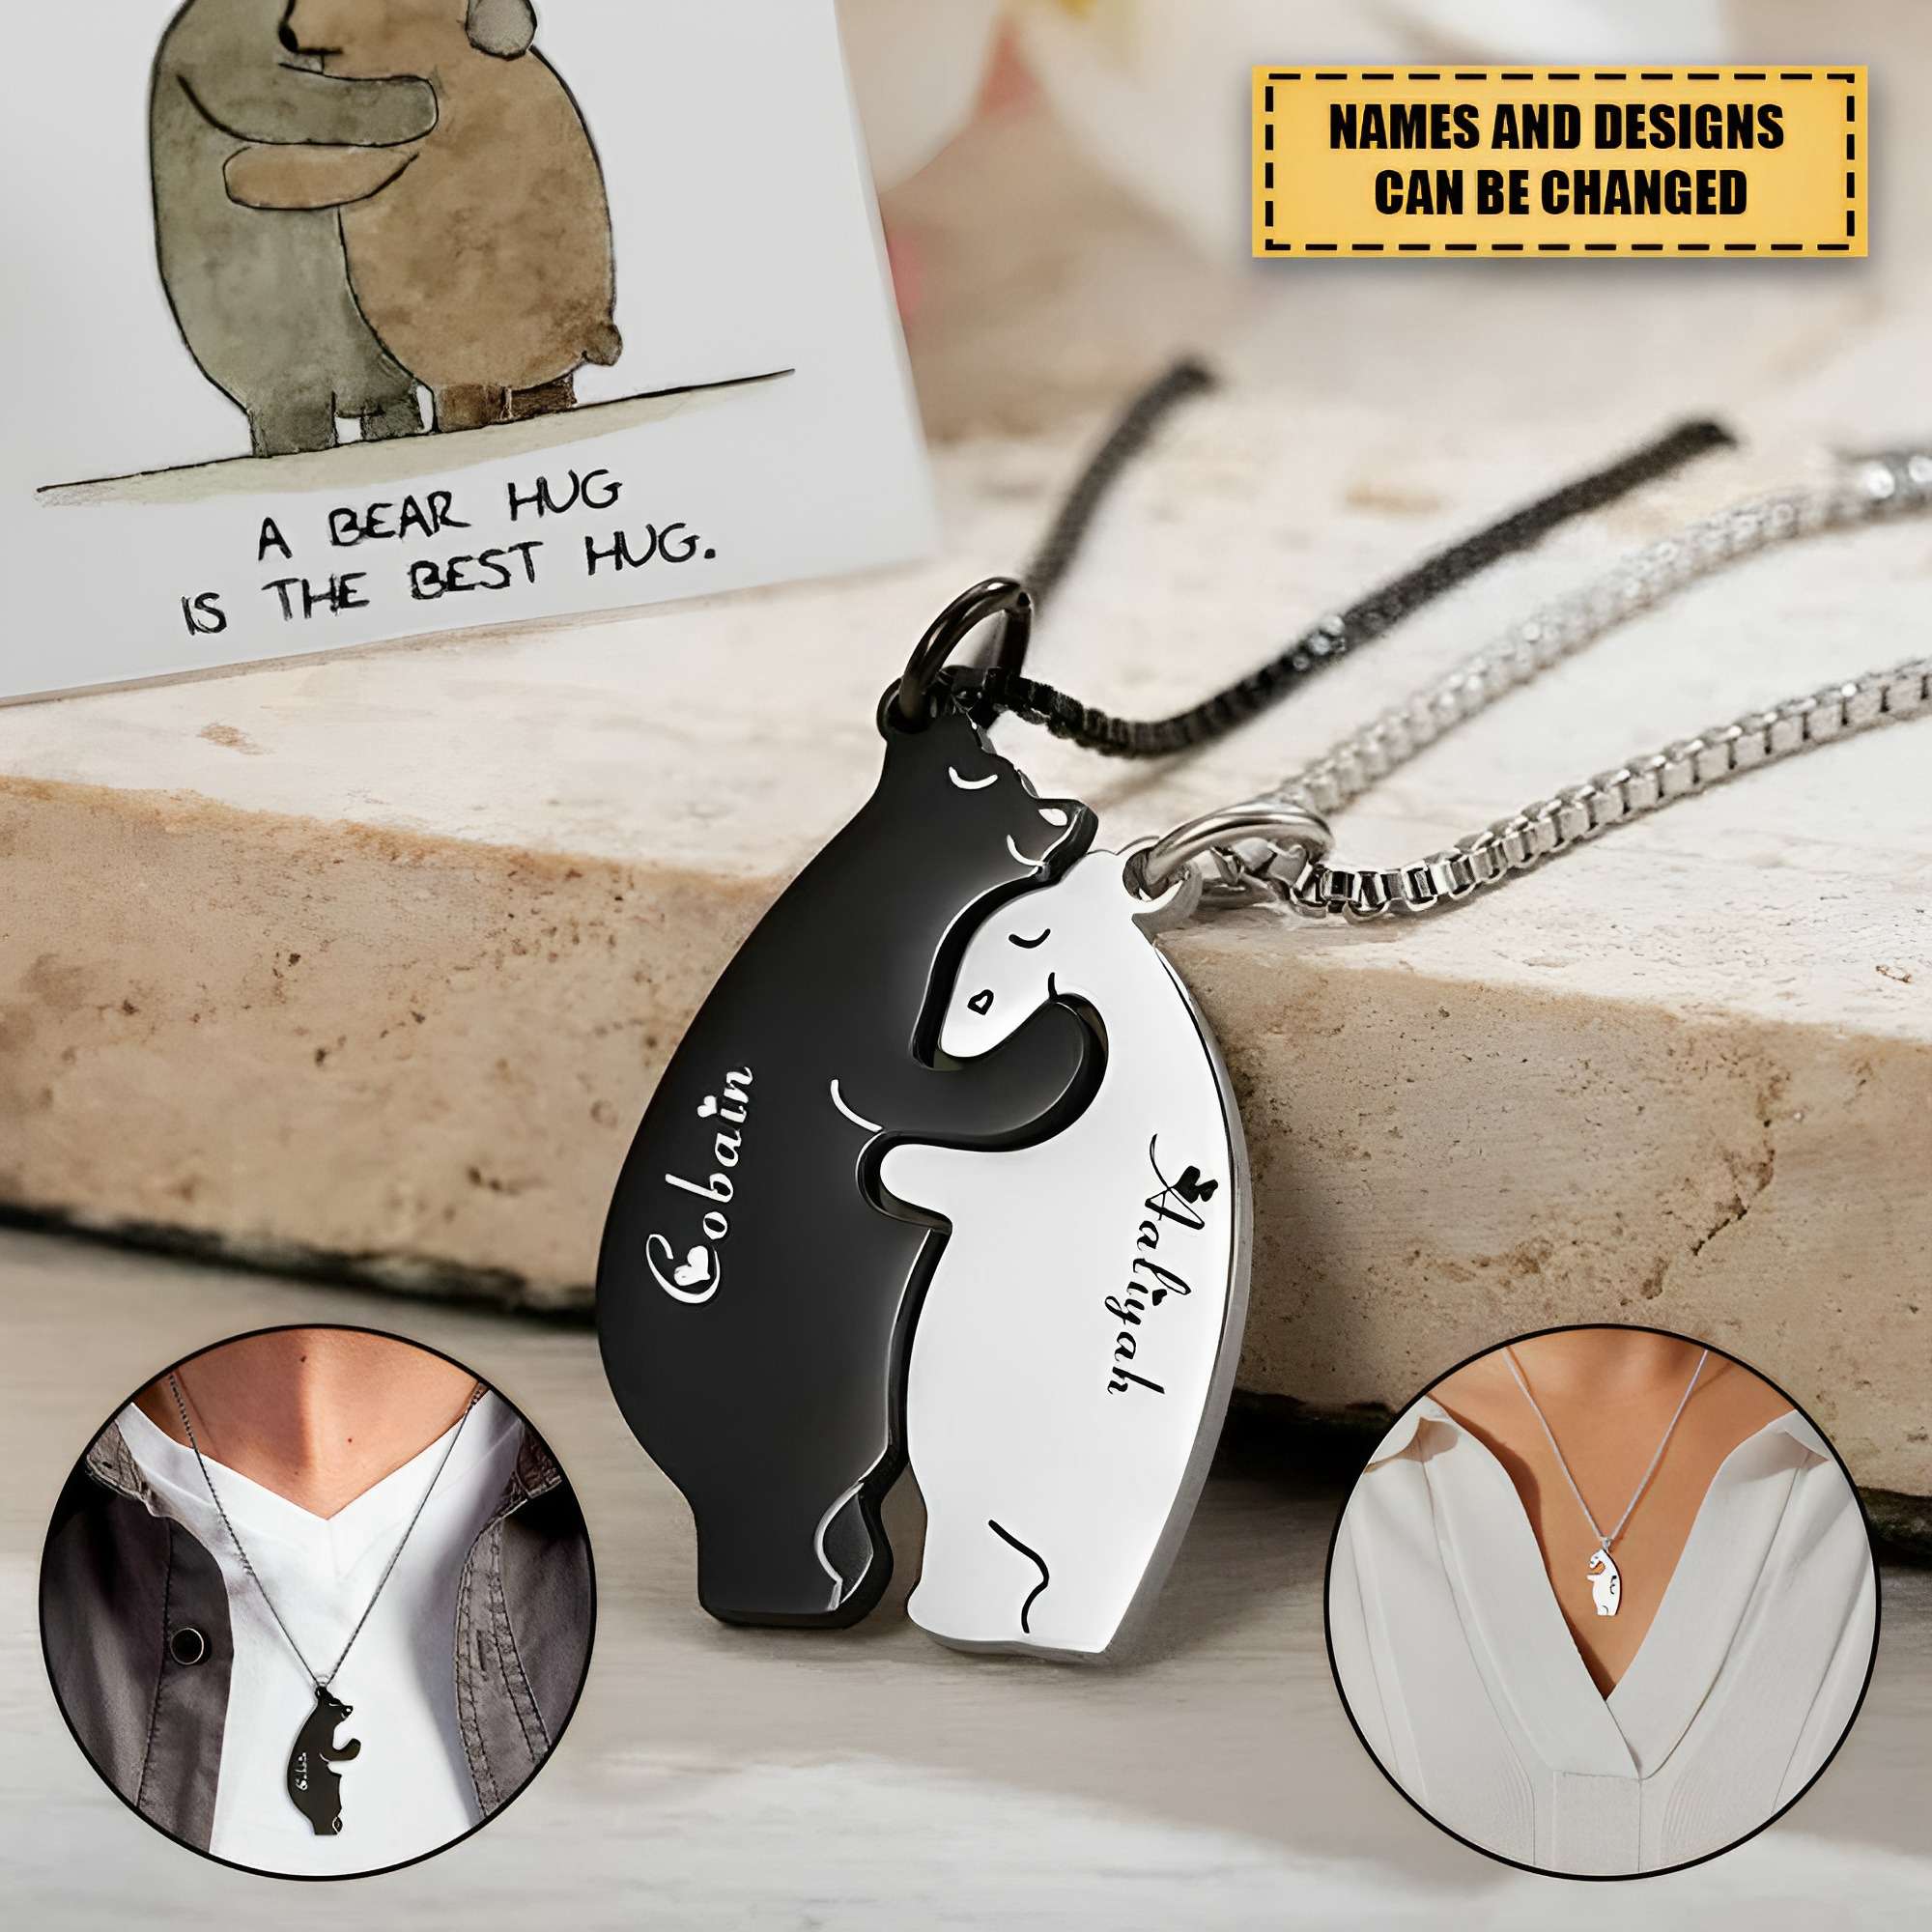 Personalized Polar Bear Necklaces Cute Bear Couple Anniversary Valentine's Day Gift